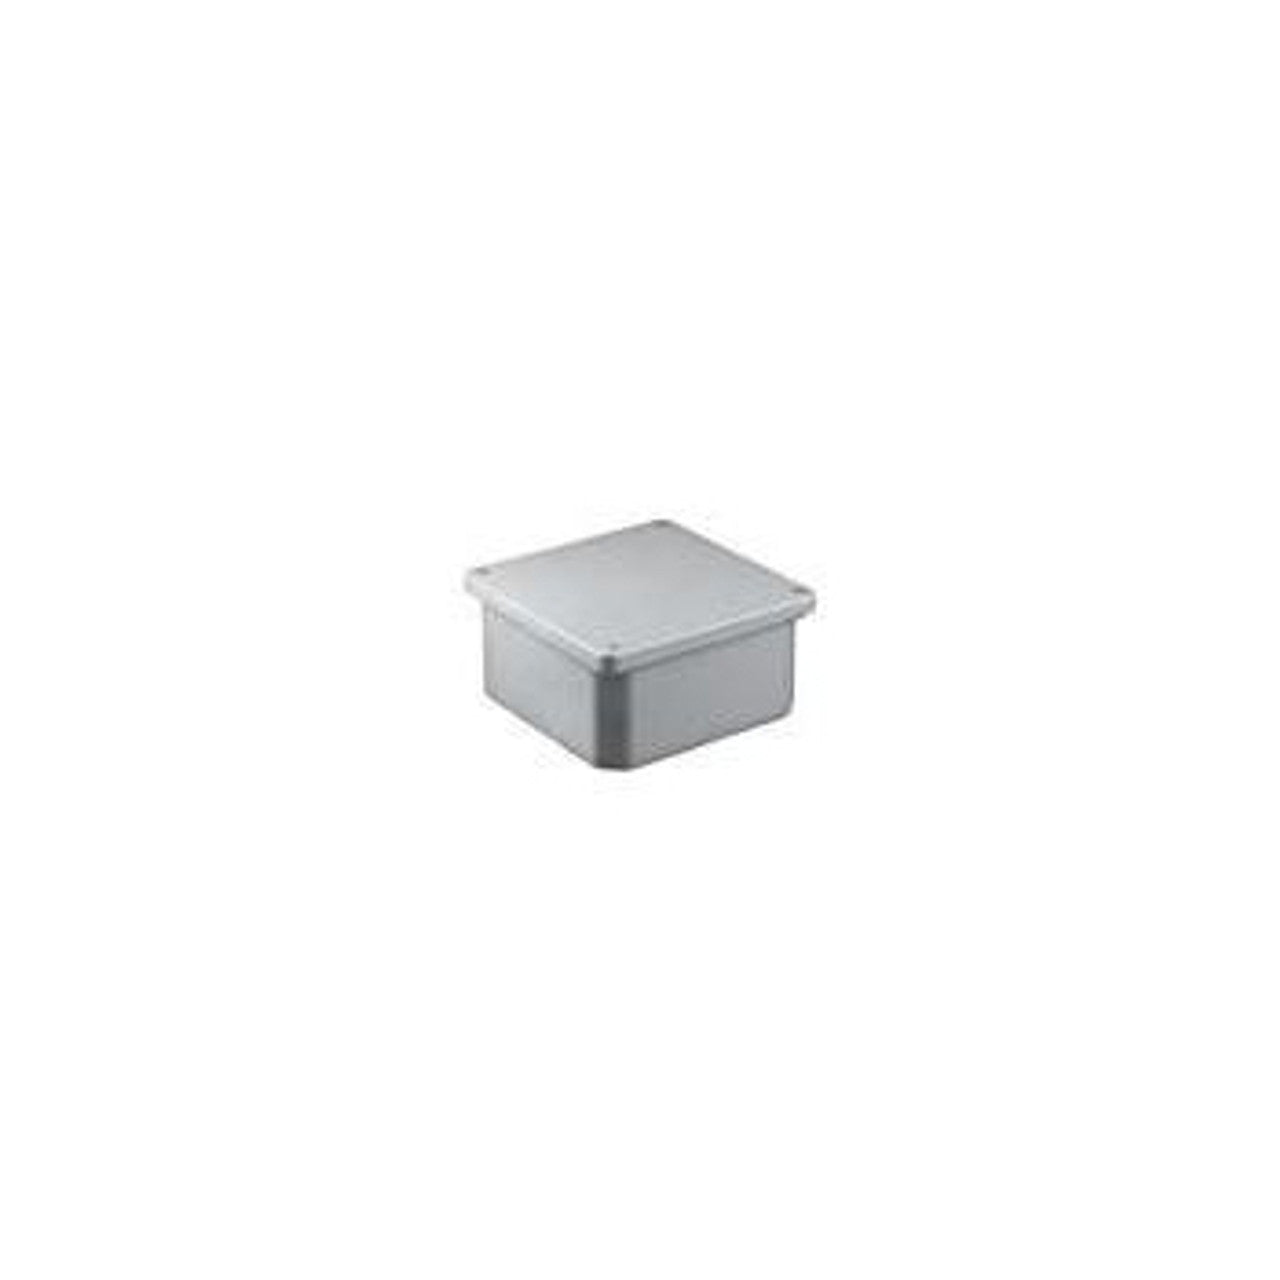 ROYAL RJB12126 Conduit Junction Box With Gasket, 12 x 12 x 6 in